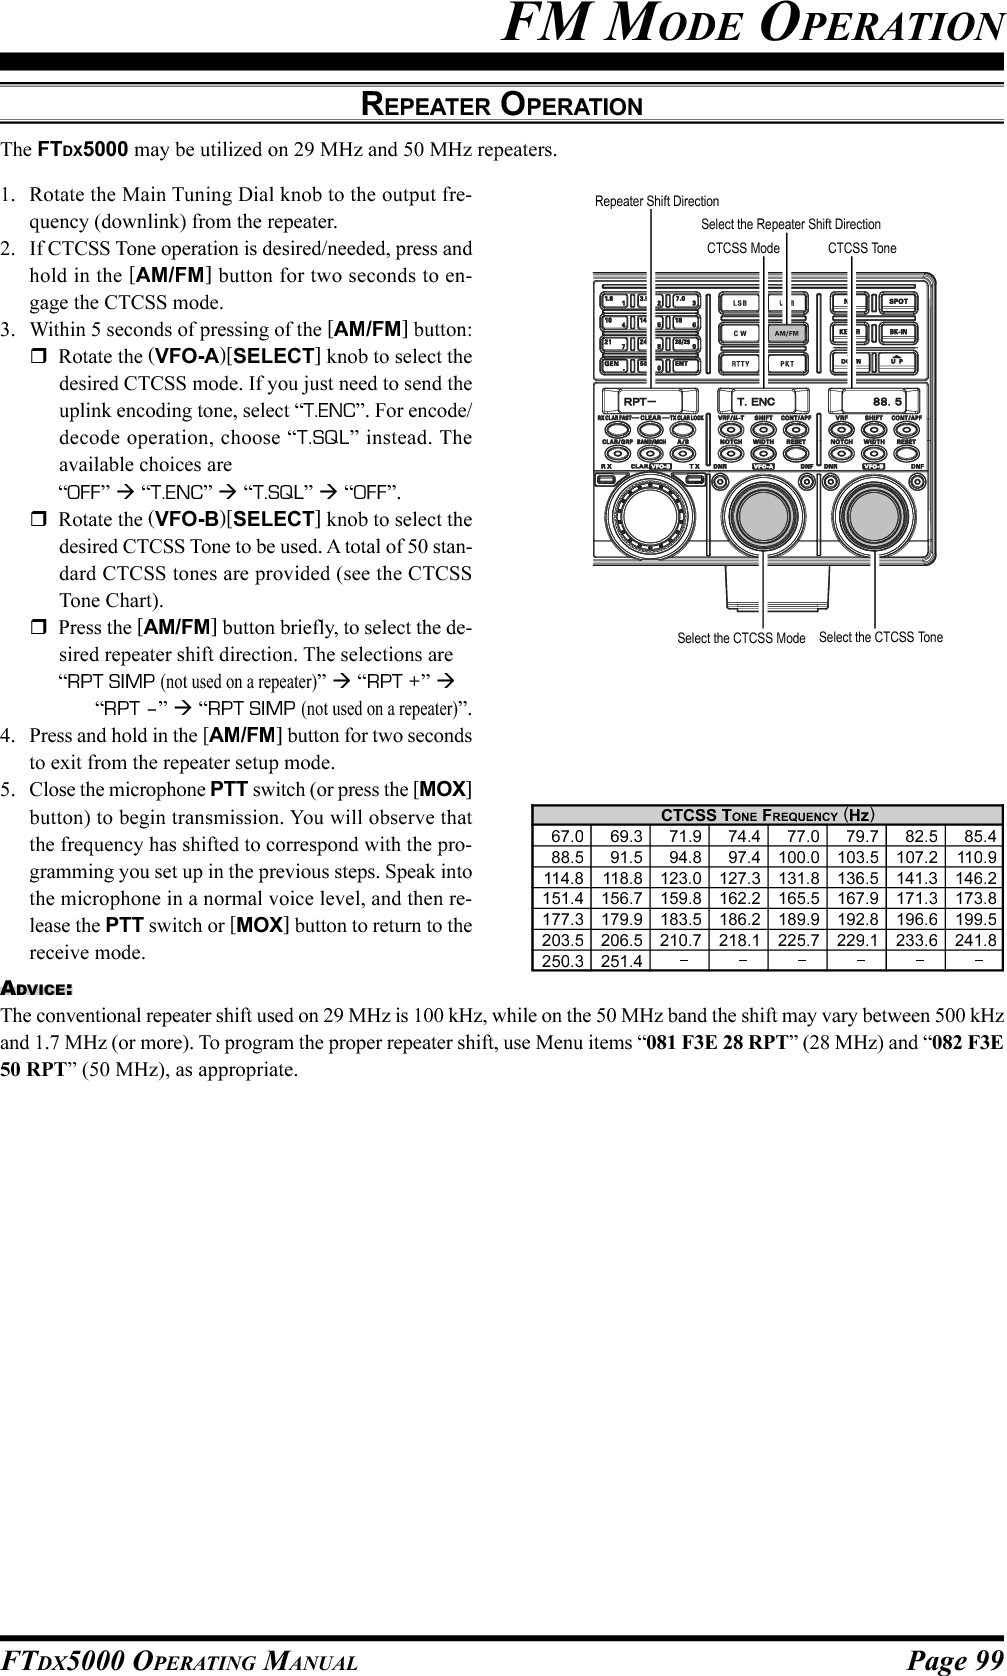 Page 99FTDX5000 OPERATING MANUALFM MODE OPERATIONREPEATER OPERATIONCTCSS TONE FREQUENCY (Hz)67.0 69.3 71.9 74.4 77.0 79.7 82.5 85.488.5 91.5 94.8 97.4 100.0 103.5 107.2 110.9114.8 118.8 123.0 127.3 131.8 136.5 141.3 146.2151.4 156.7 159.8 162.2 165.5 167.9 171.3 173.8177.3 179.9 183.5 186.2 189.9 192.8 196.6 199.5203.5 206.5 210.7 218.1 225.7 229.1 233.6 241.8250.3 251.4ADVICE:The conventional repeater shift used on 29 MHz is 100 kHz, while on the 50 MHz band the shift may vary between 500 kHzand 1.7 MHz (or more). To program the proper repeater shift, use Menu items “081 F3E 28 RPT” (28 MHz) and “082 F3E50 RPT” (50 MHz), as appropriate.The FTDX5000 may be utilized on 29 MHz and 50 MHz repeaters.1. Rotate the Main Tuning Dial knob to the output fre-quency (downlink) from the repeater.2. If CTCSS Tone operation is desired/needed, press andhold in the [AM/FM] button for two seconds to en-gage the CTCSS mode.3. Within 5 seconds of pressing of the [AM/FM] button:Rotate the (VFO-A)[SELECT] knob to select thedesired CTCSS mode. If you just need to send theuplink encoding tone, select “T.ENC”. For encode/decode operation, choose “T.SQL” instead. Theavailable choices are“OFF”  “T.ENC”  “T.SQL”  “OFF”.Rotate the (VFO-B)[SELECT] knob to select thedesired CTCSS Tone to be used. A total of 50 stan-dard CTCSS tones are provided (see the CTCSSTone Chart).Press the [AM/FM] button briefly, to select the de-sired repeater shift direction. The selections are“RPT SIMP (not used on a repeater)”  “RPT +” “RPT –”  “RPT SIMP (not used on a repeater)”.4. Press and hold in the [AM/FM] button for two secondsto exit from the repeater setup mode.5. Close the microphone PTT switch (or press the [MOX]button) to begin transmission. You will observe thatthe frequency has shifted to correspond with the pro-gramming you set up in the previous steps. Speak intothe microphone in a normal voice level, and then re-lease the PTT switch or [MOX] button to return to thereceive mode.CTCSS ToneSelect the Repeater Shift DirectionRepeater Shift DirectionSelect the CTCSS Mode Select the CTCSS ToneCTCSS Mode